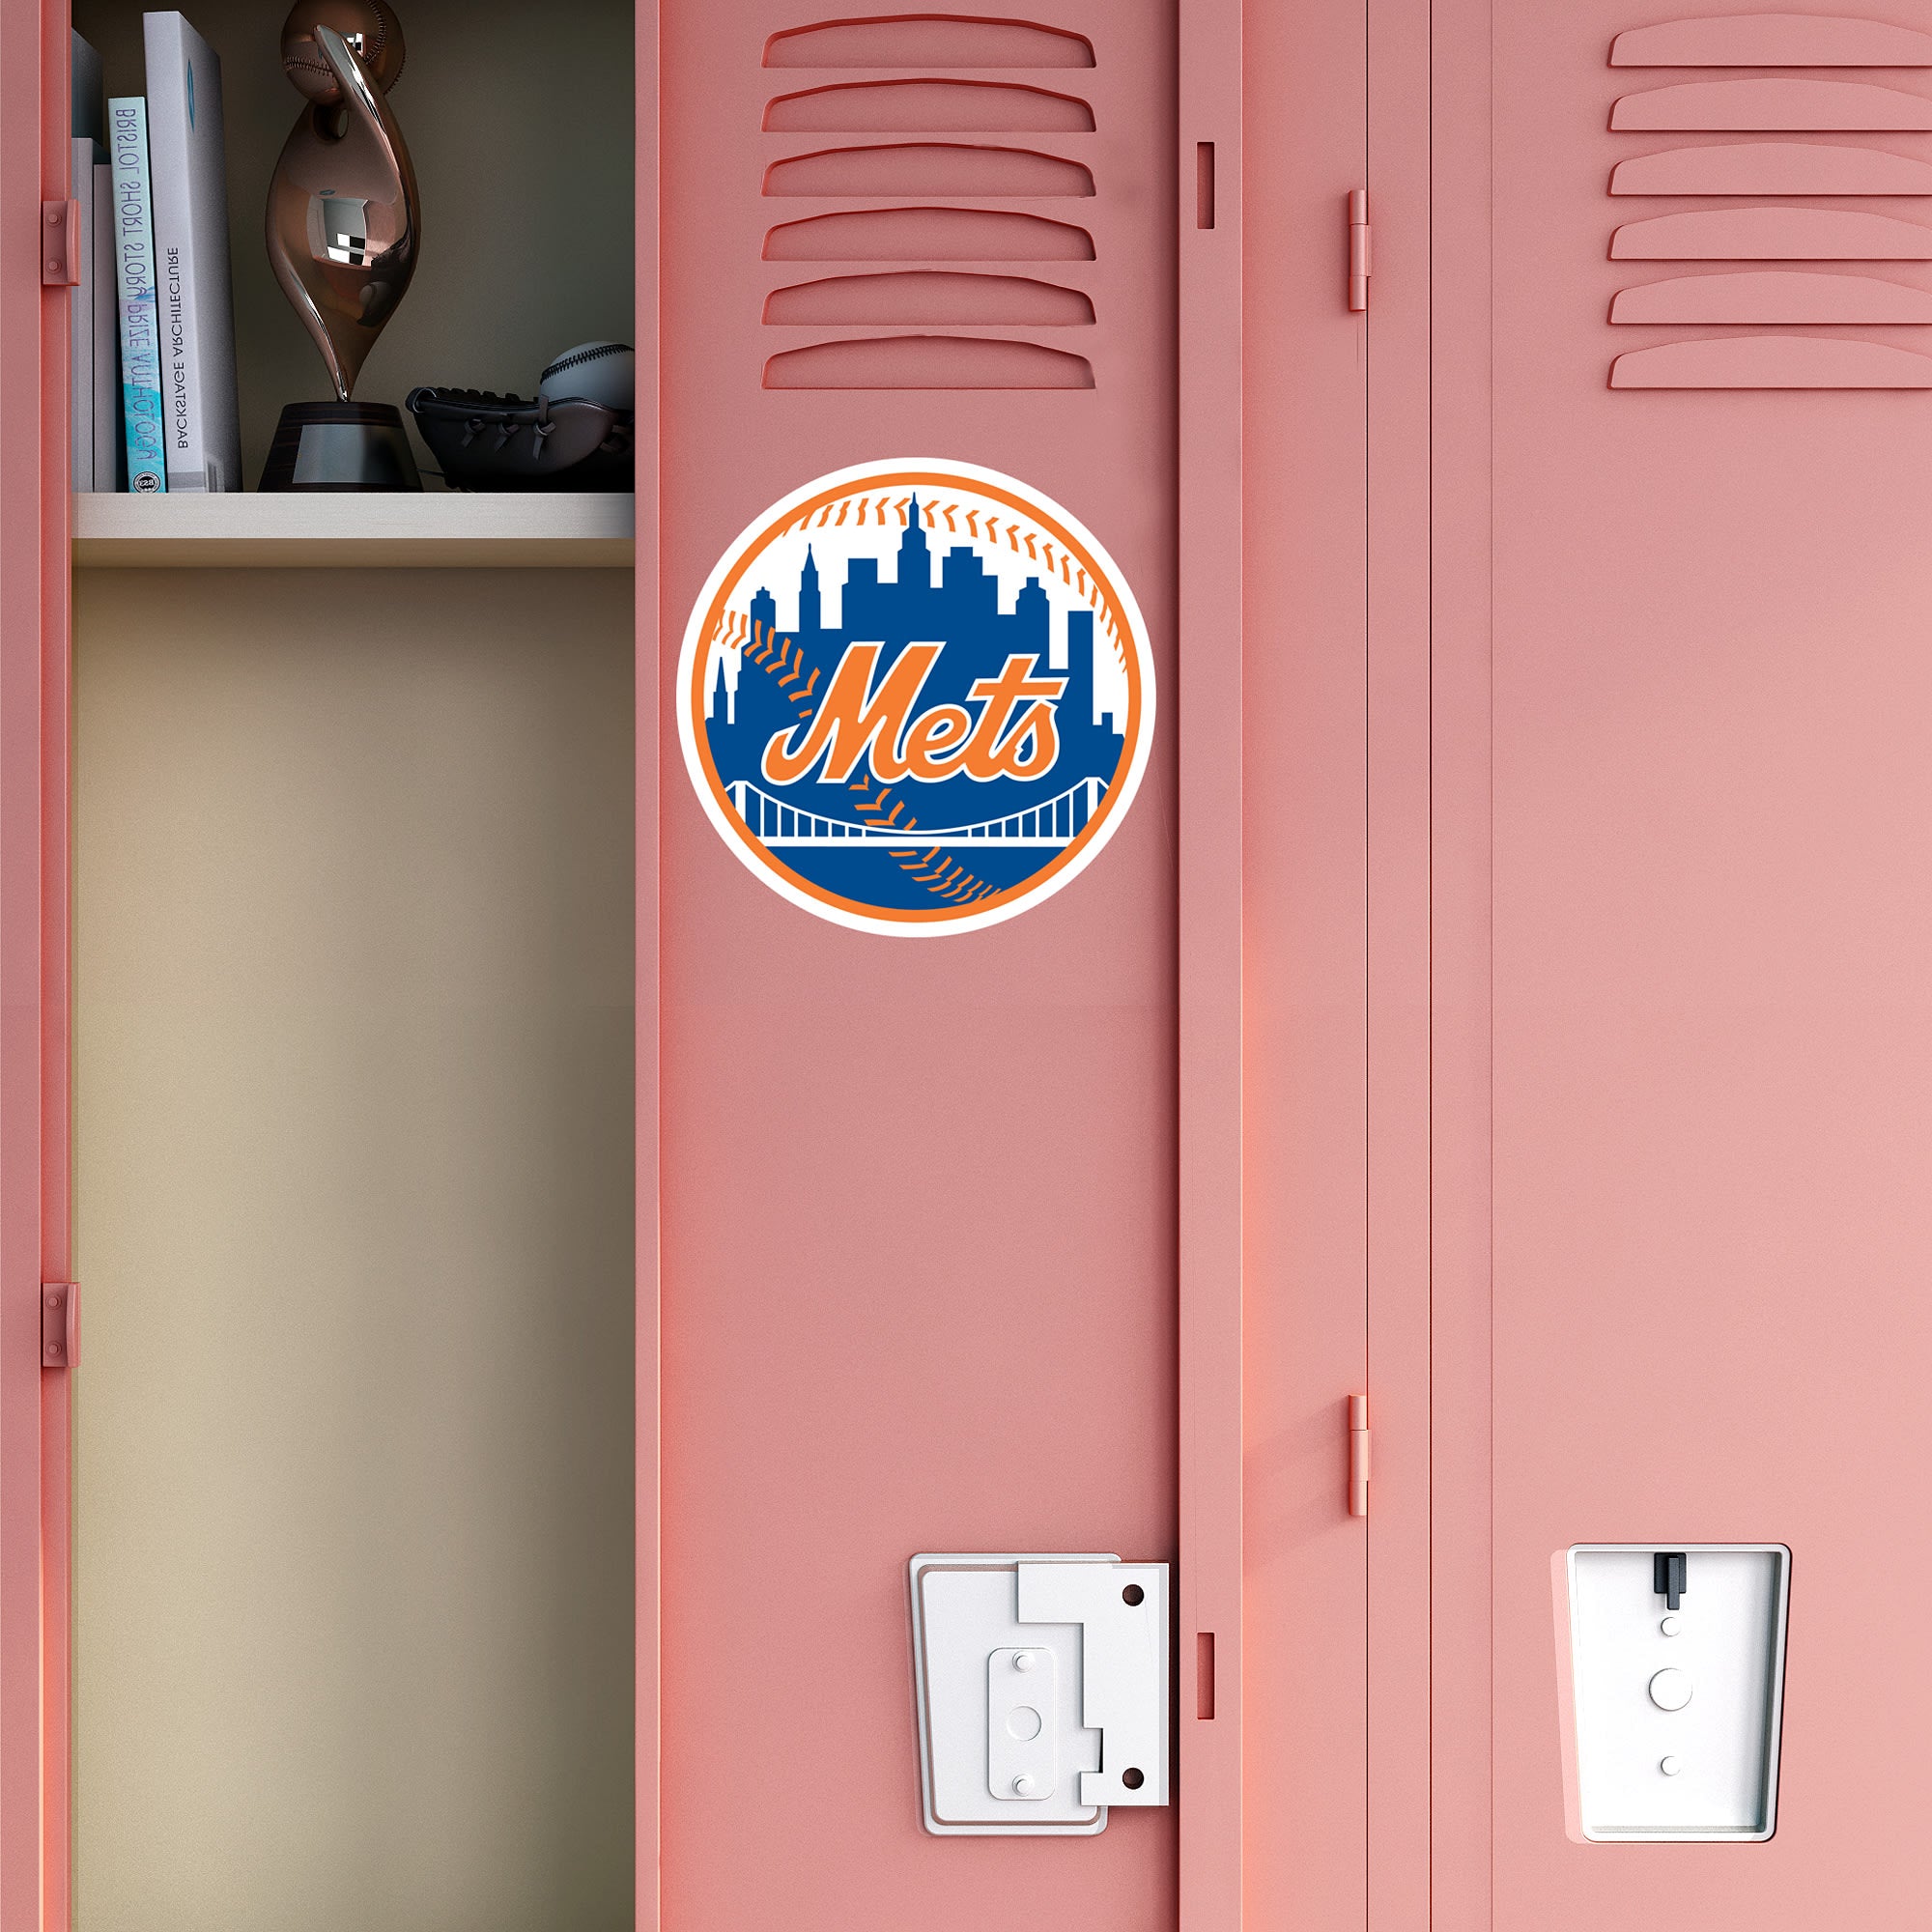 New York Mets: Logo - Officially Licensed MLB Removable Wall Decal Large by Fathead | Vinyl